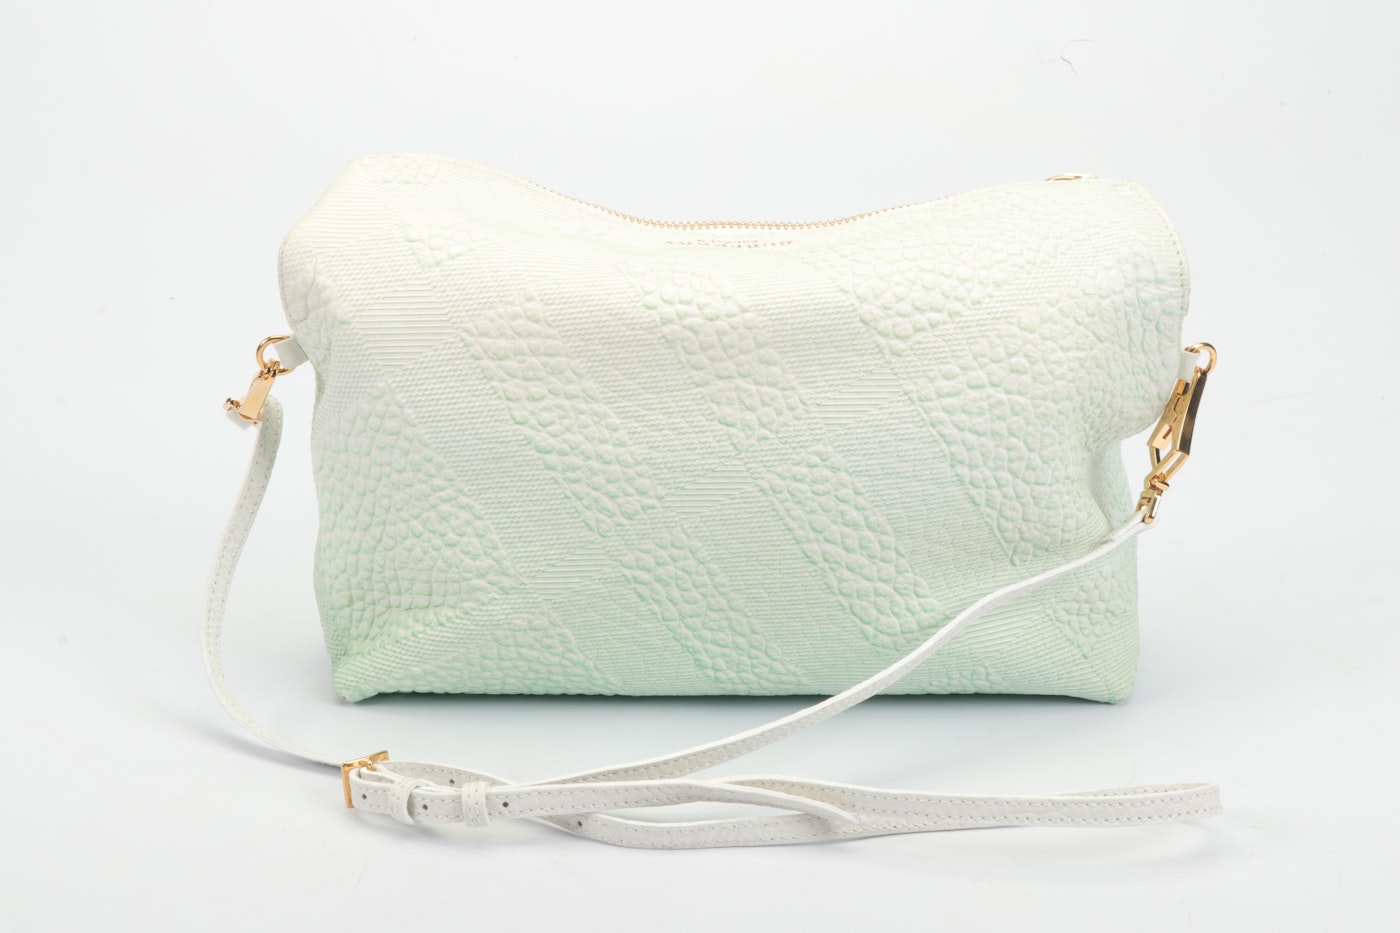 Burberry Prorsum Mint Green and Off-White Ombré Textured Leather Crossbody Bag | EBTH